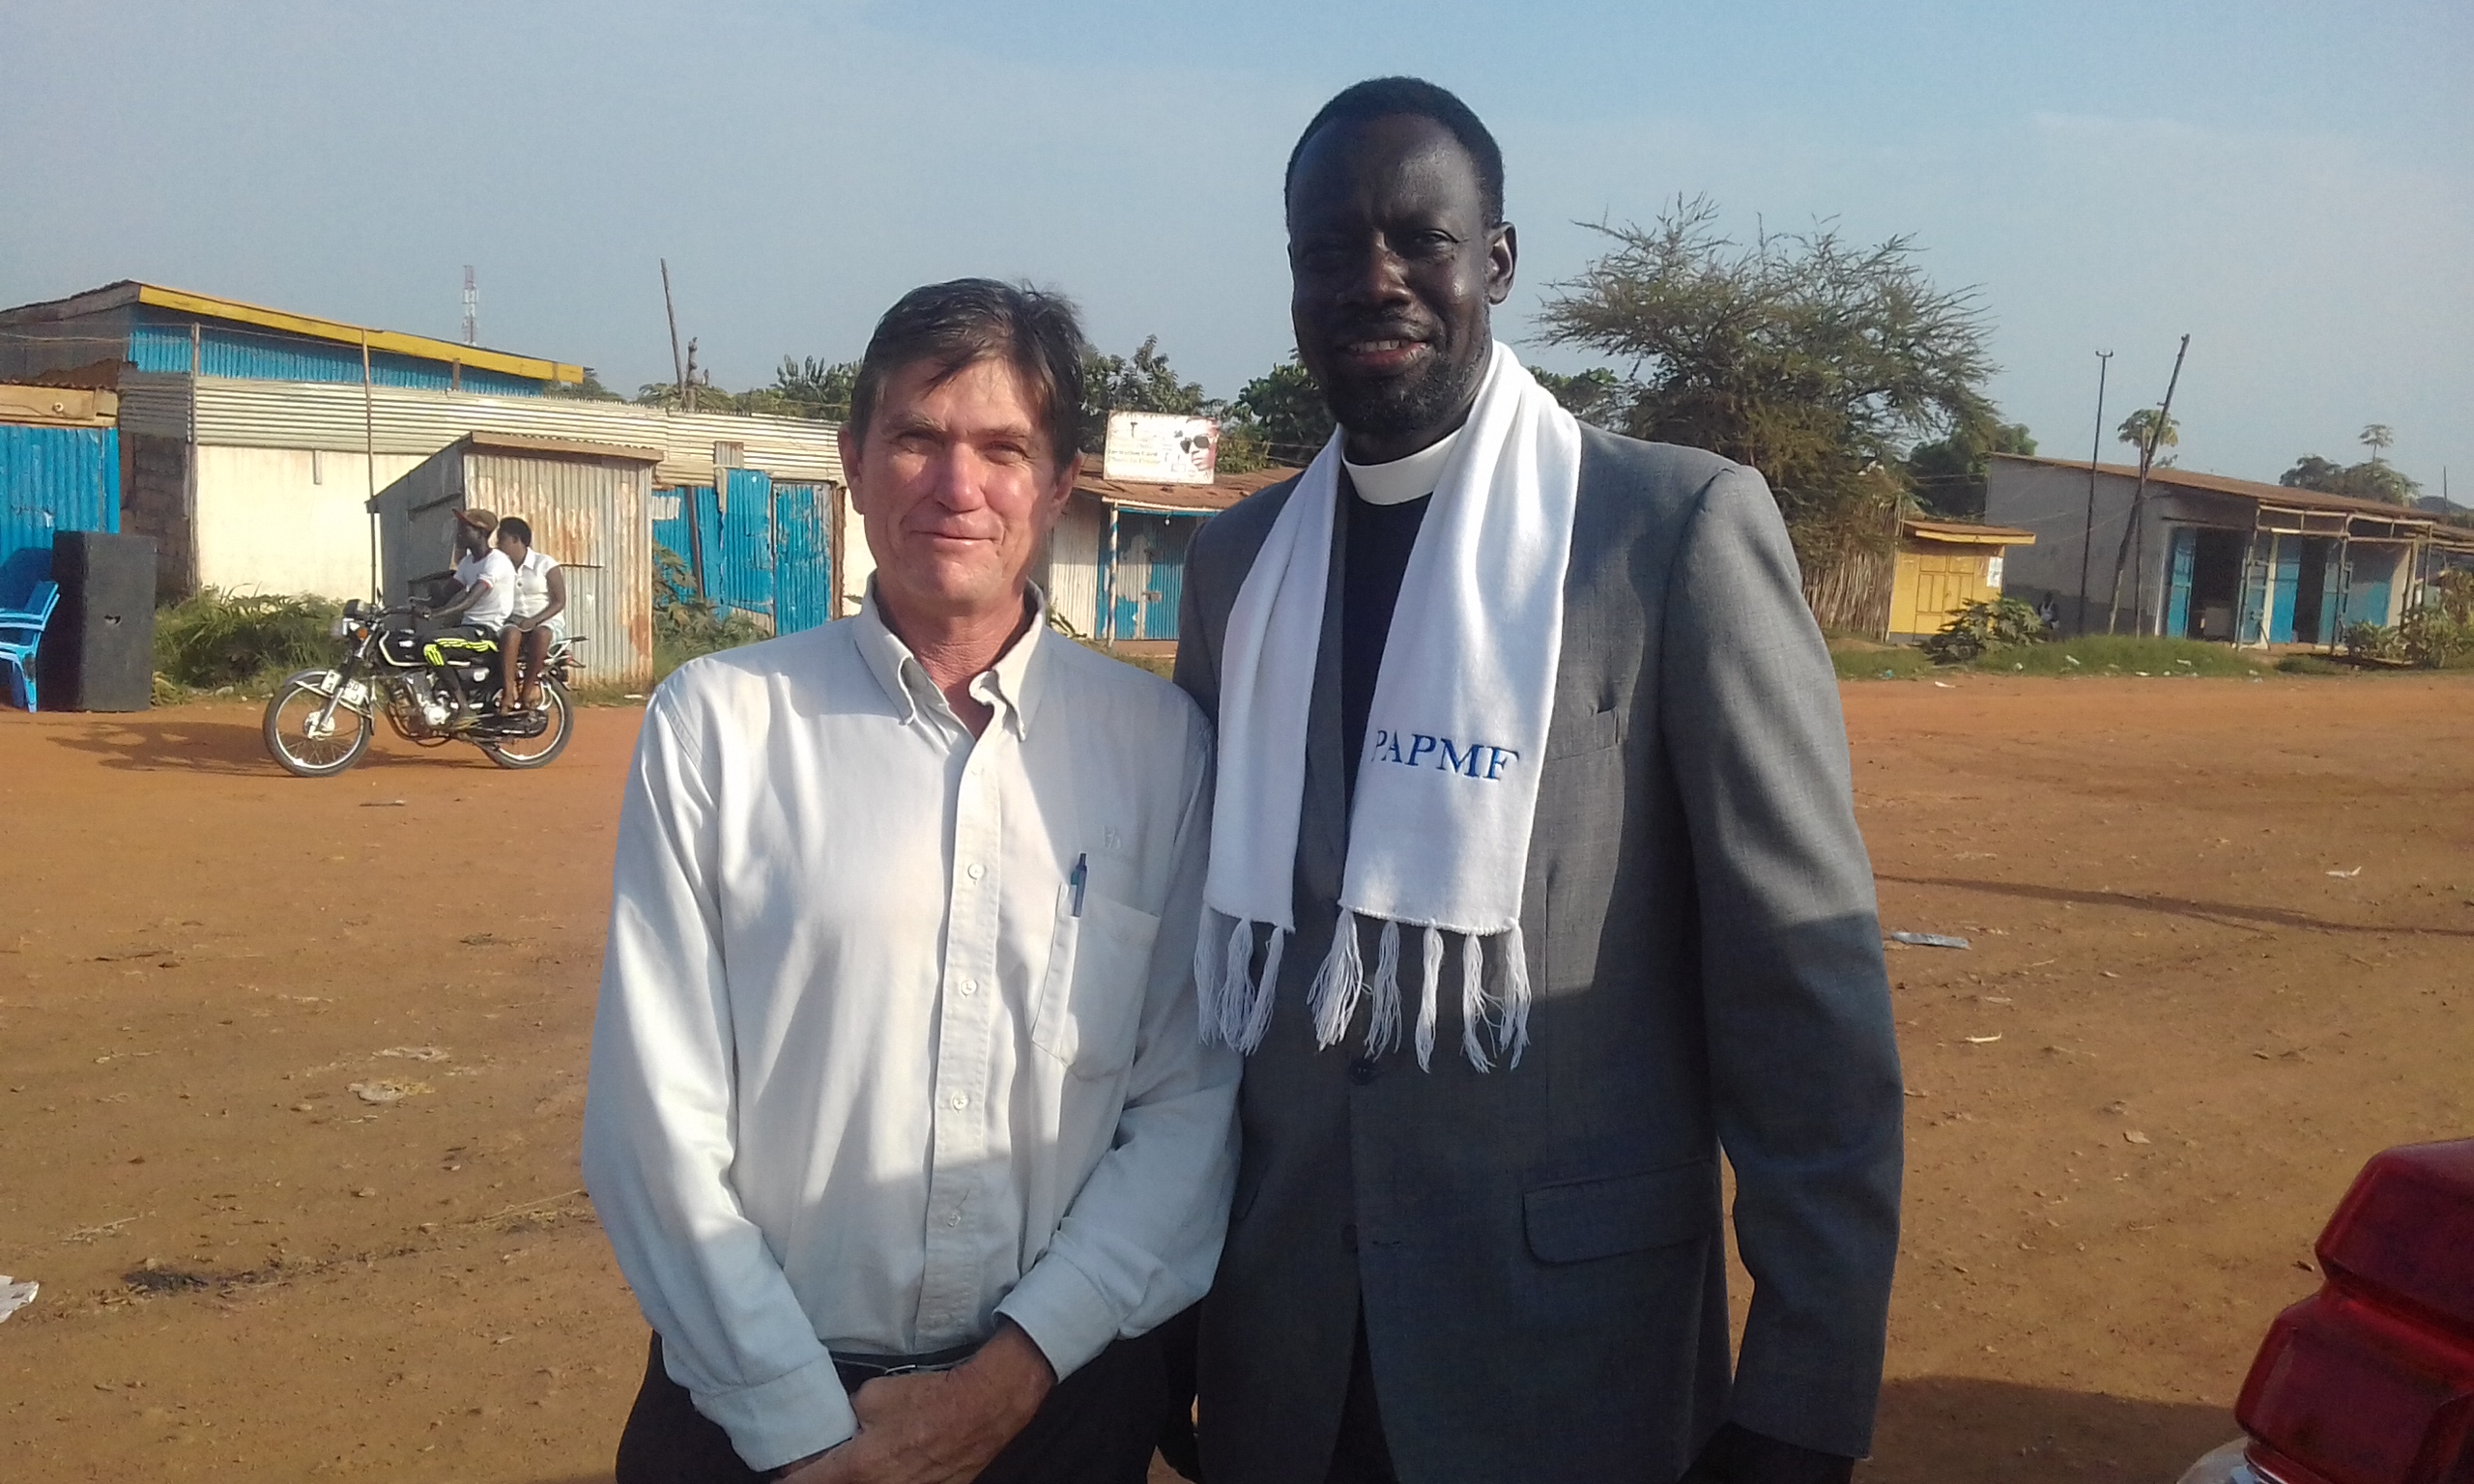 Jim with Rev. Tut outside of a Dinka congregation after Rev. Tut preached there one Sunday. One of many South Sudanese working towards peace through the love of Christ.